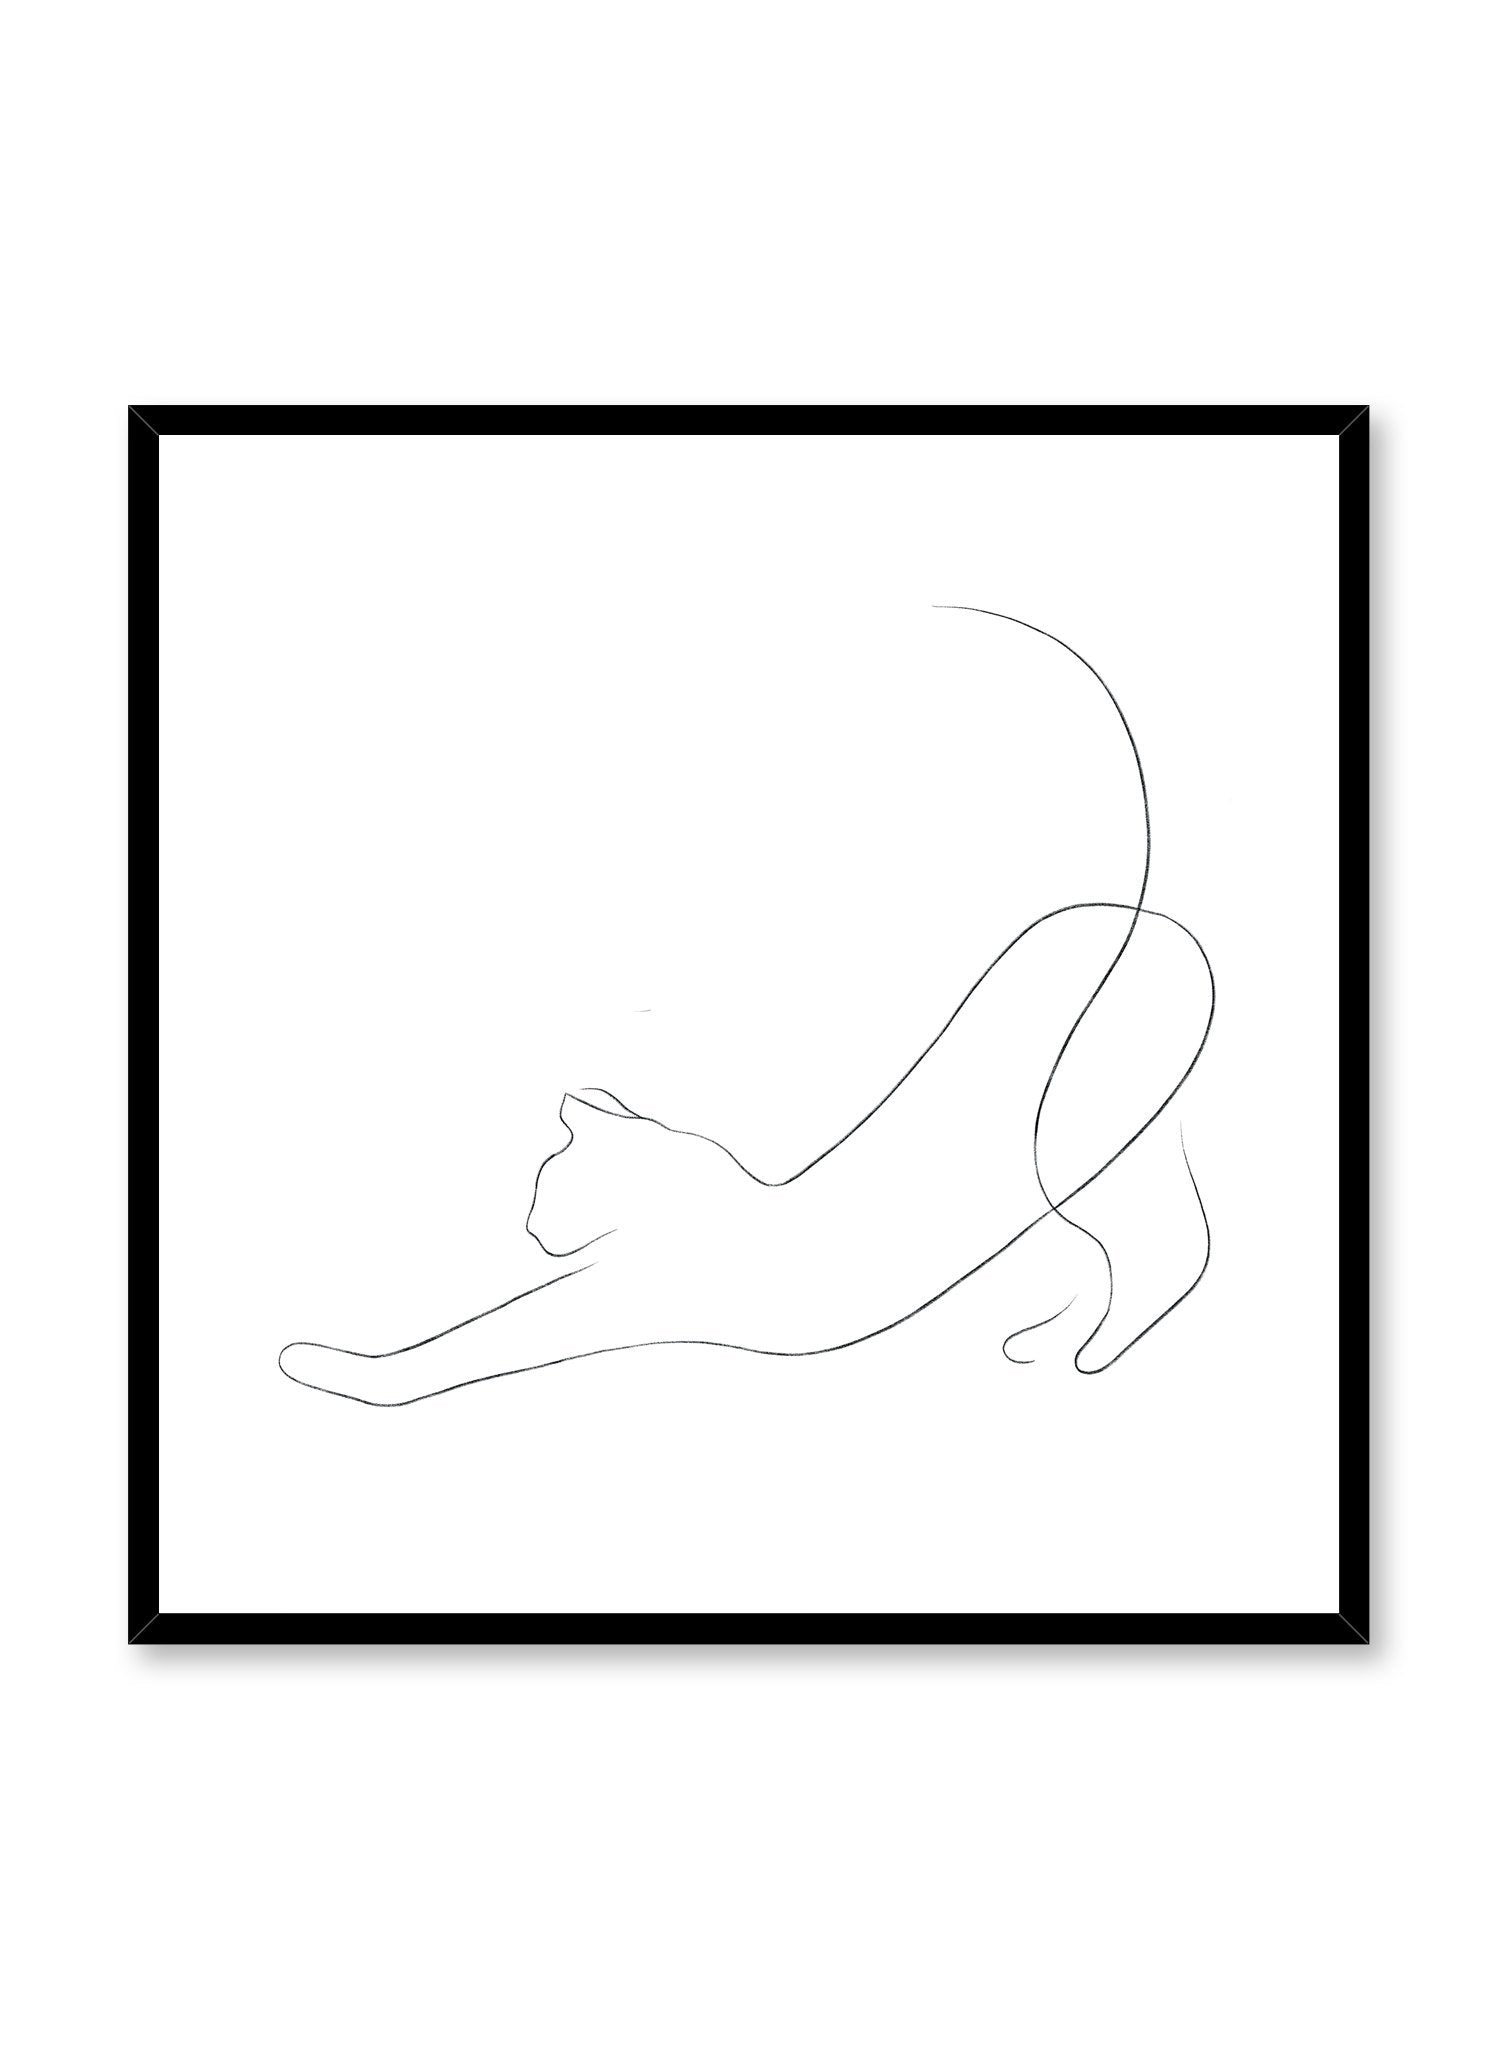 Modern minimalist poster by Opposite Wall with abstract illustration of stretching cat line art